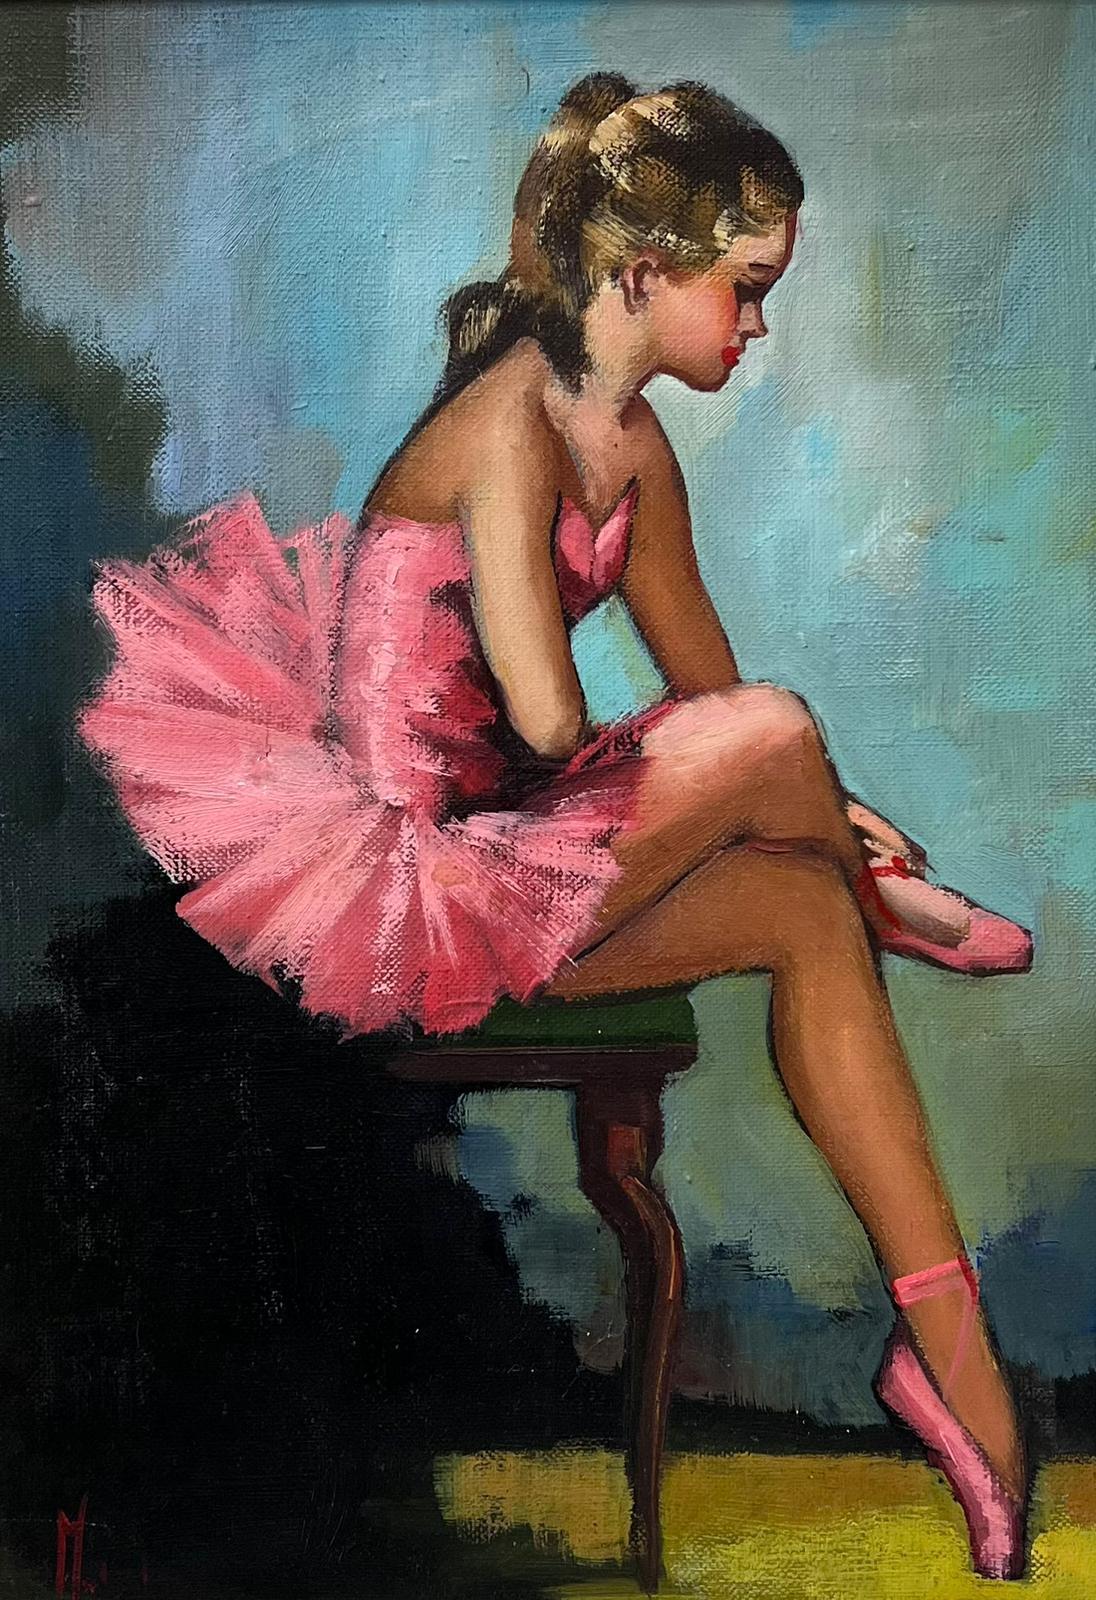 The Young Ballerina
French School, mid 20th century
indistinctly signed oil painting on canvas, framed (original period)
framed: 18 x 14.5 inches
canvas: 13 x 9.5 inches
provenance: private collection, France
condition: very good and sound condition